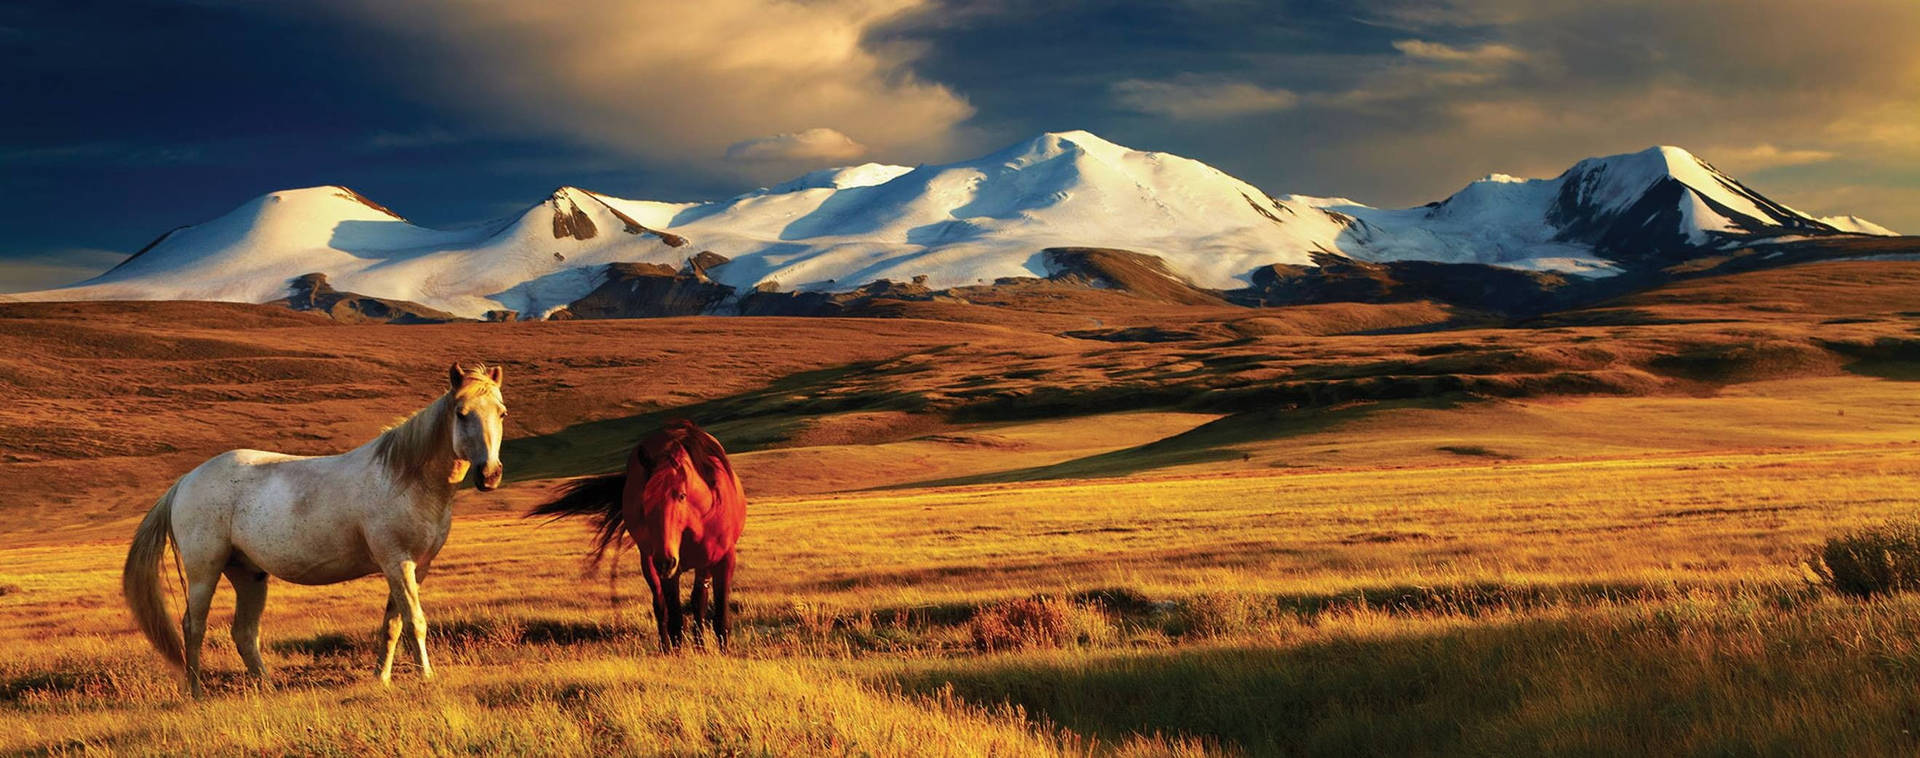 "Mongolian Horses Grazing in the Sprawling Pastures" Wallpaper